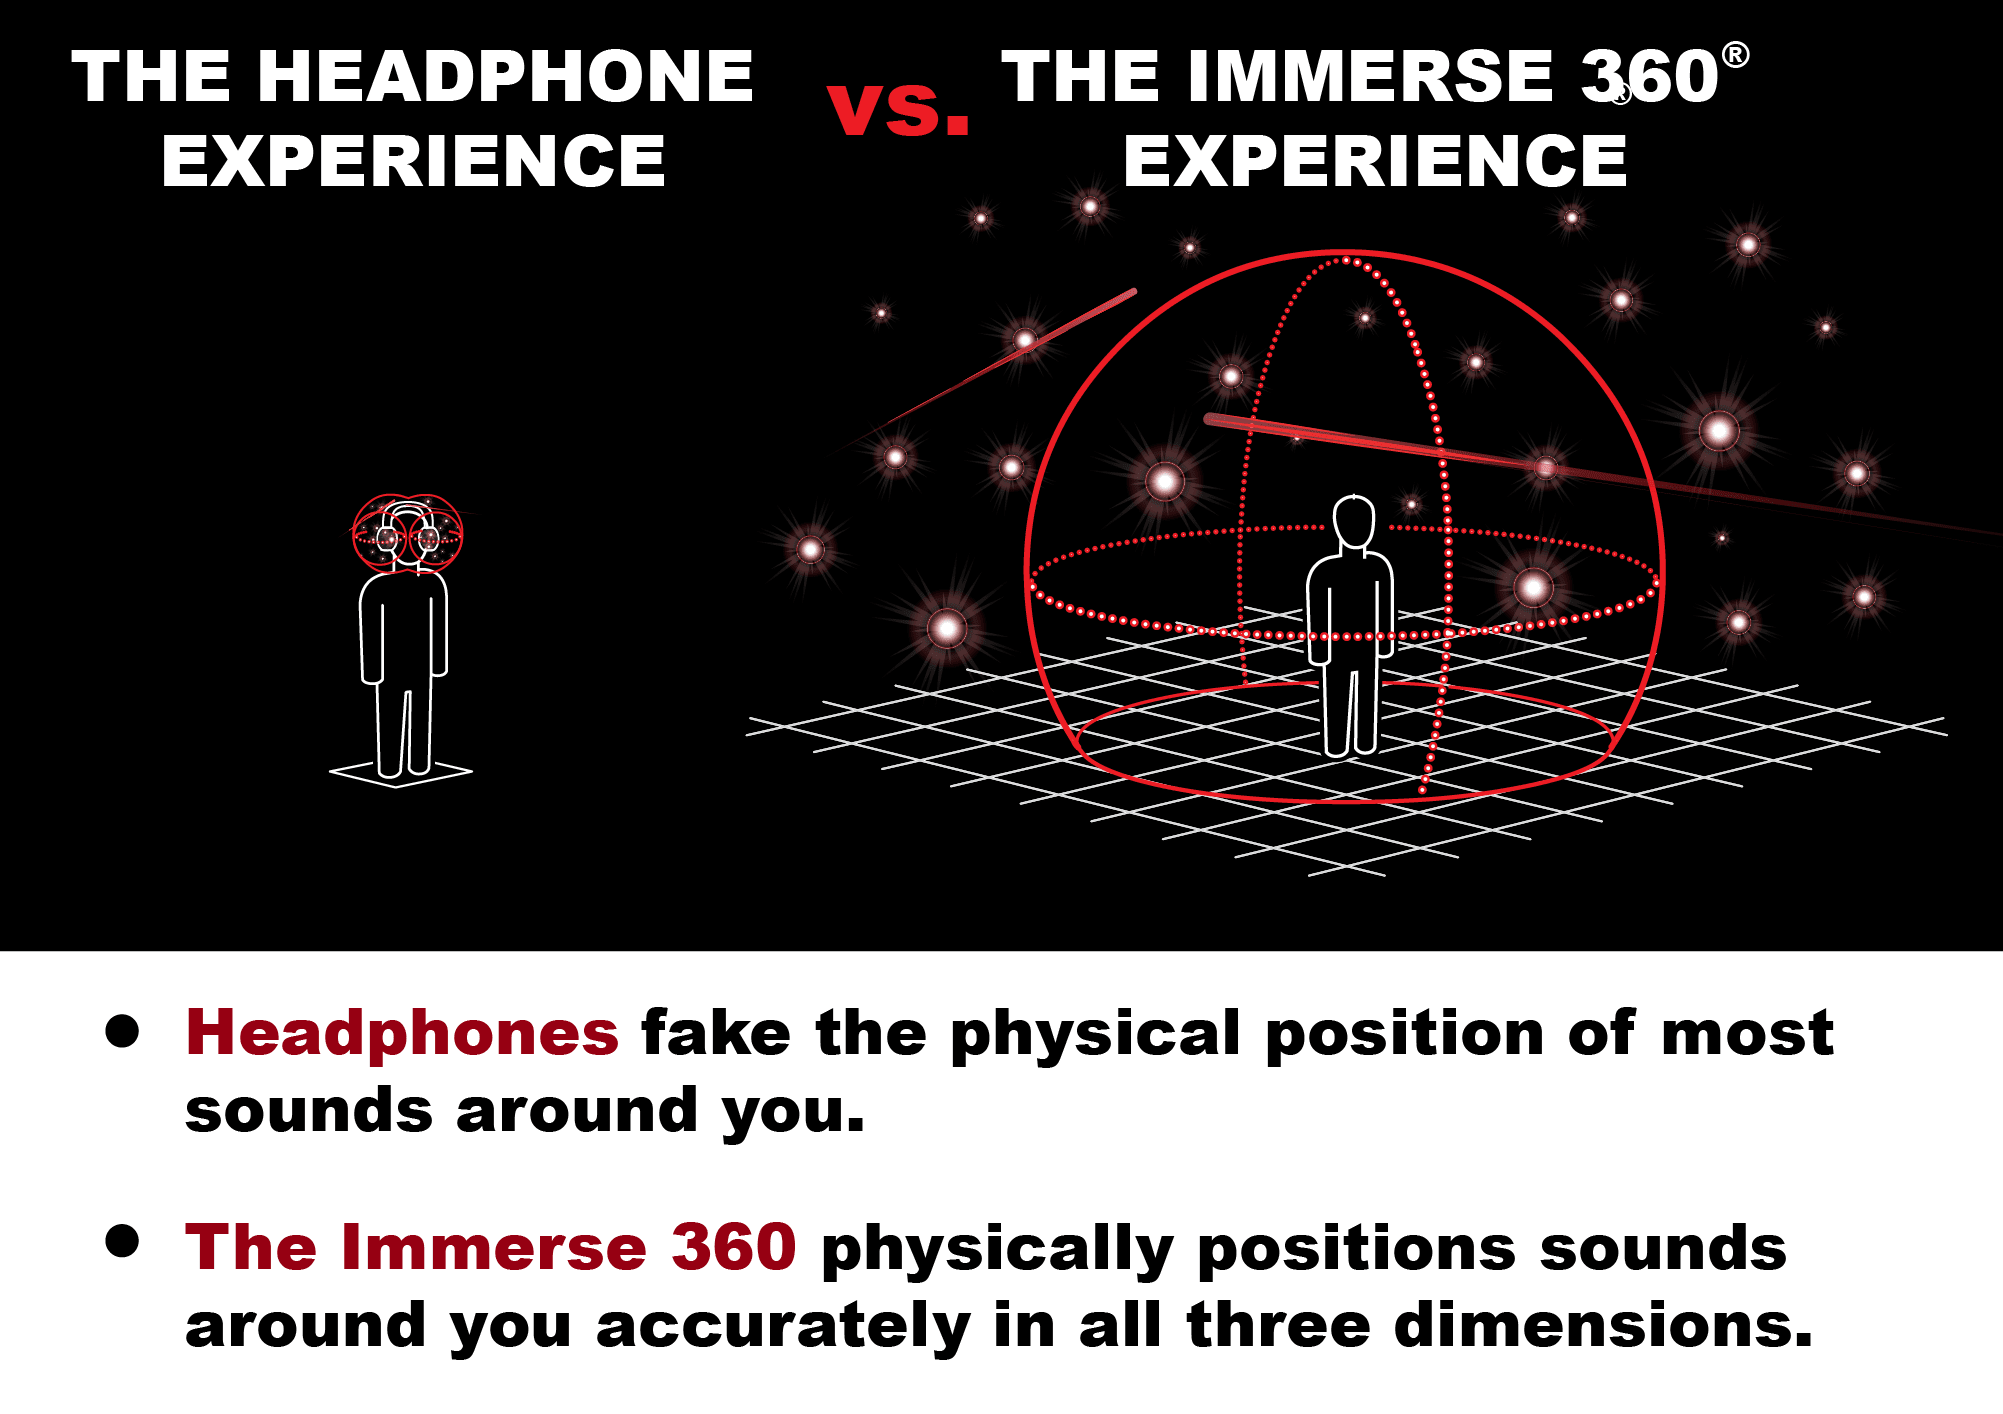 Visualization comparing the sound positioning of headphones vs the Immerse 360